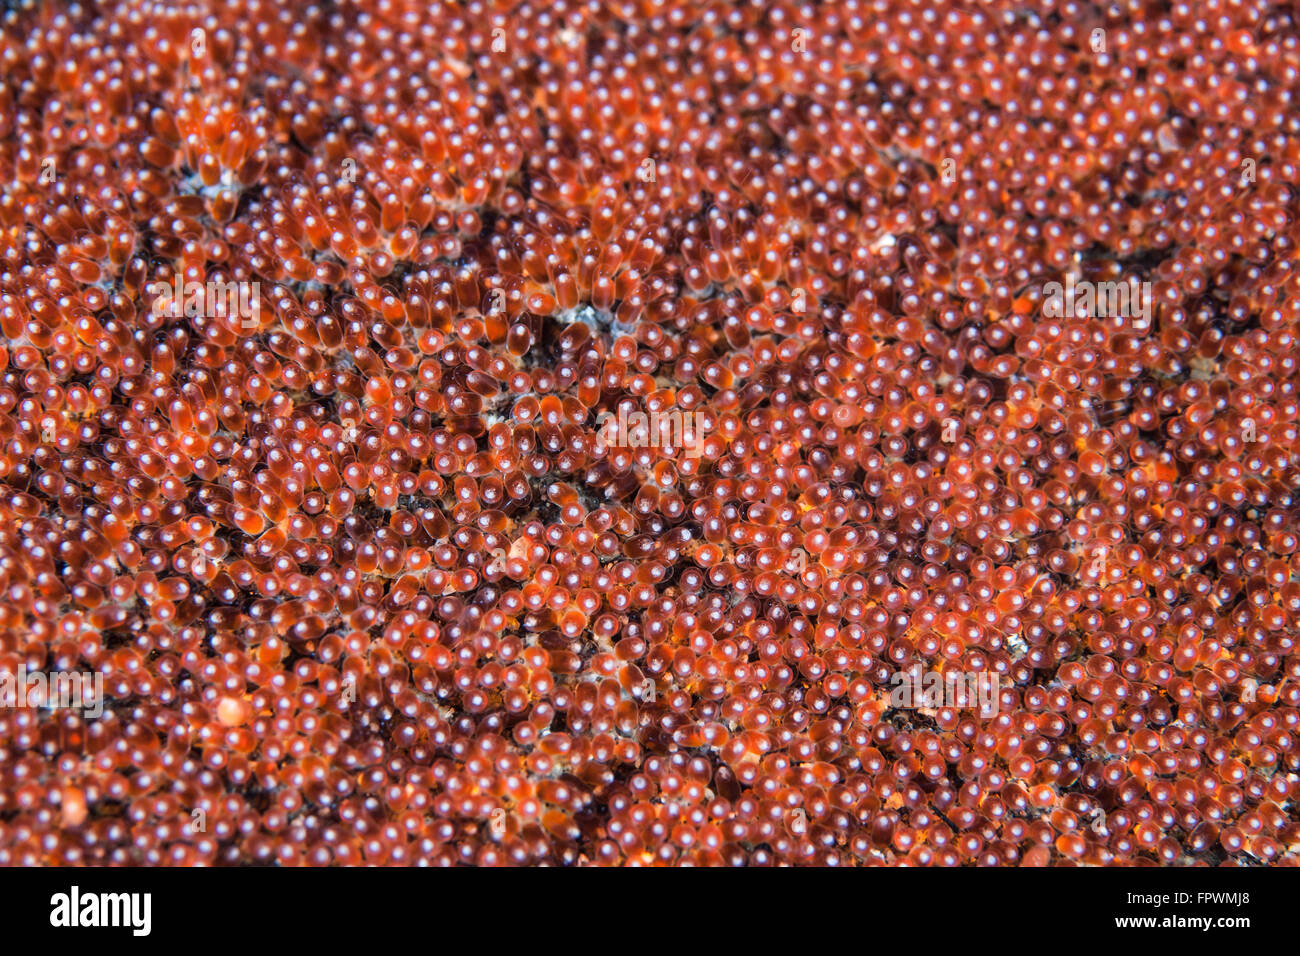 Anemonefish eggs develop on the seafloor in Komodo National Park, Indonesia. This tropical area in the western Pacific harbors a Stock Photo